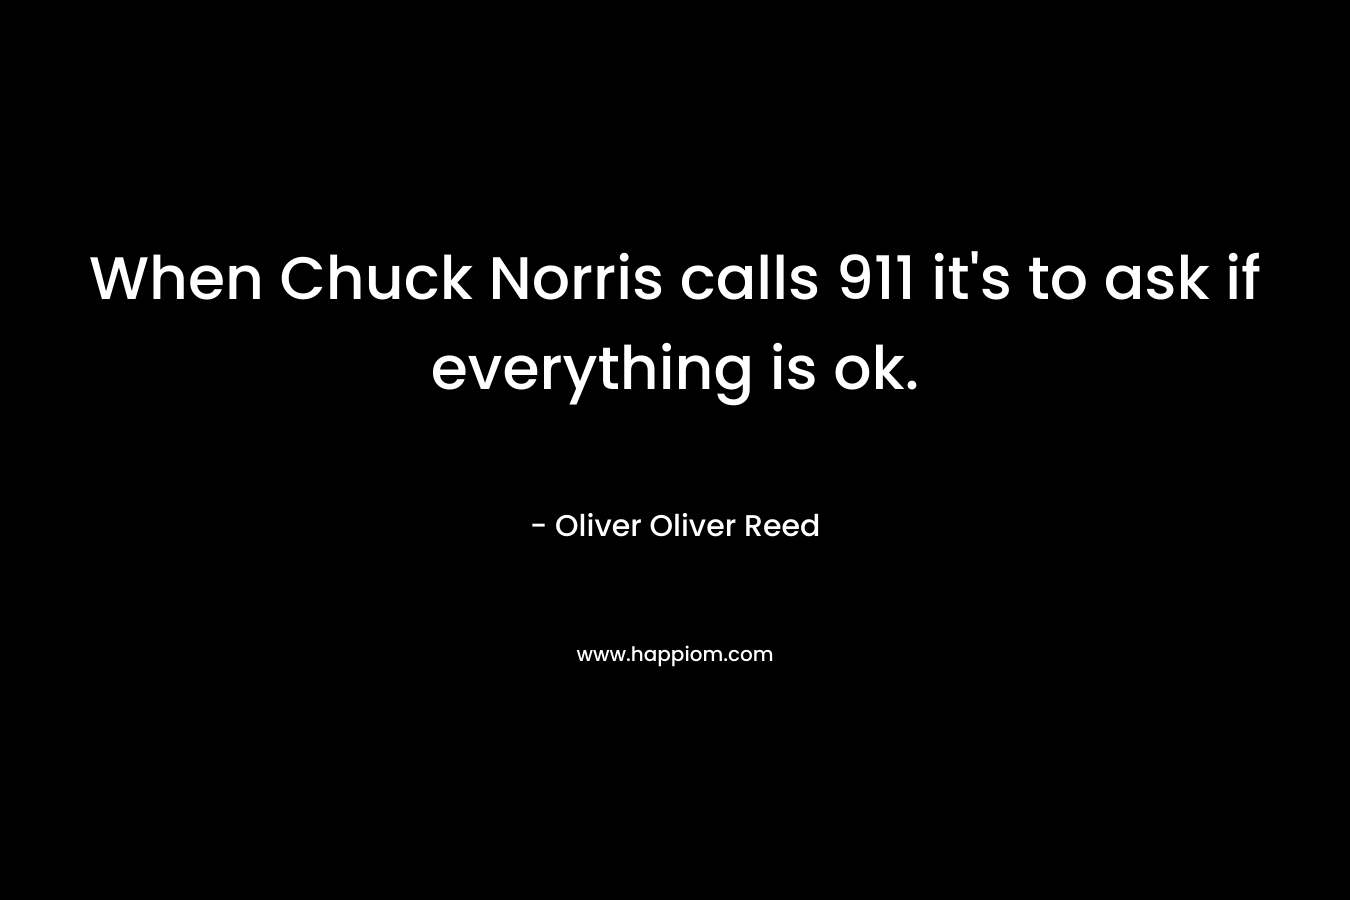 When Chuck Norris calls 911 it’s to ask if everything is ok. – Oliver Oliver Reed